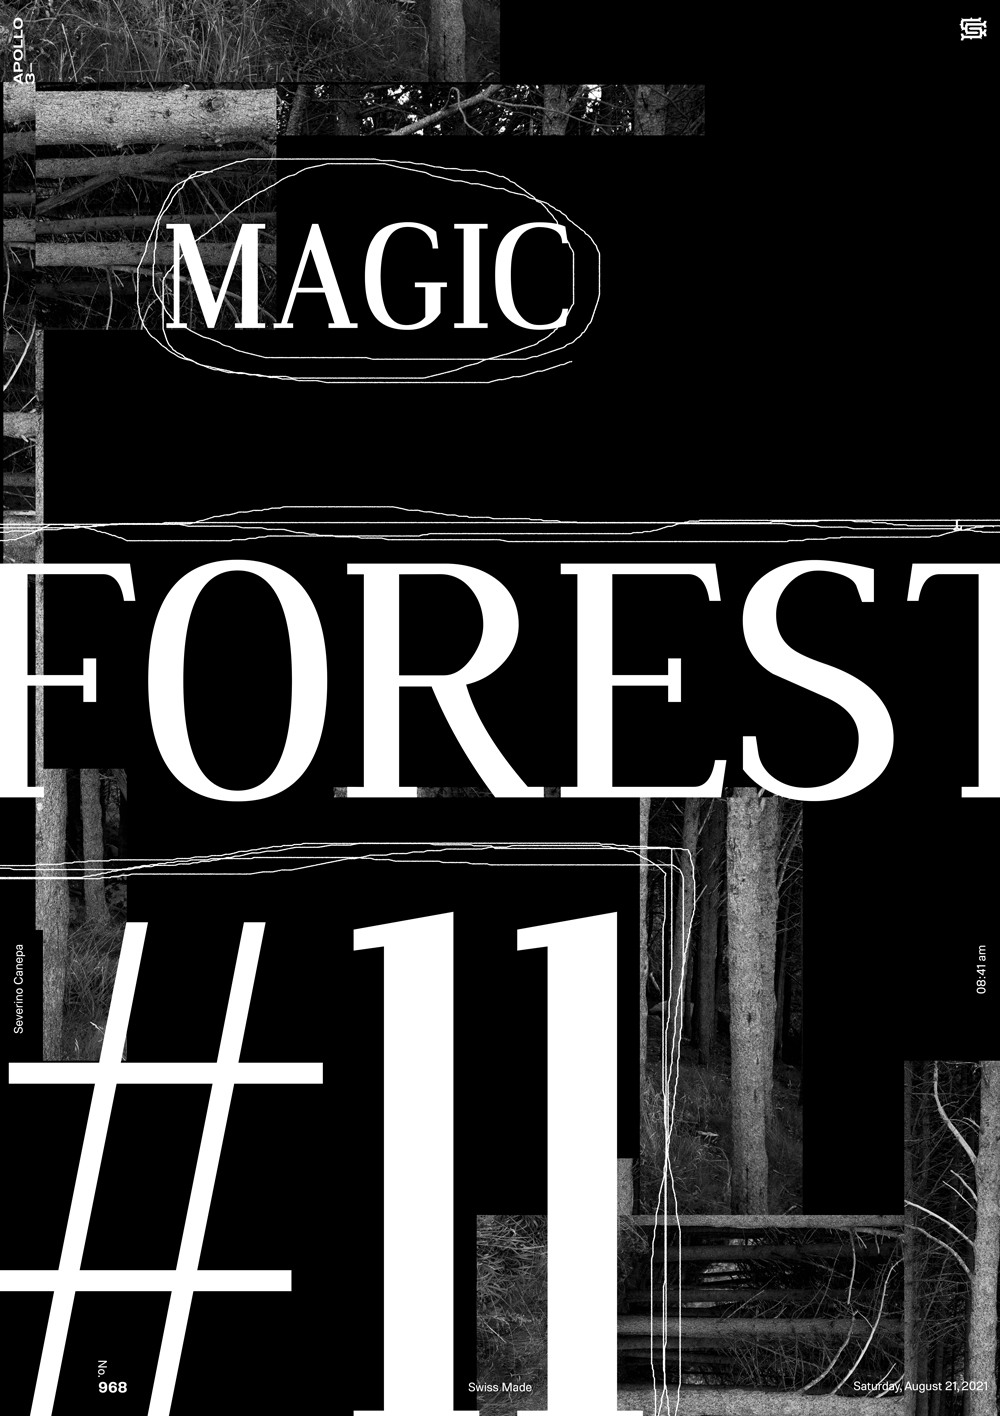 Minimalist poster creation I realized with brush, types, and the black and white photograph of a forest